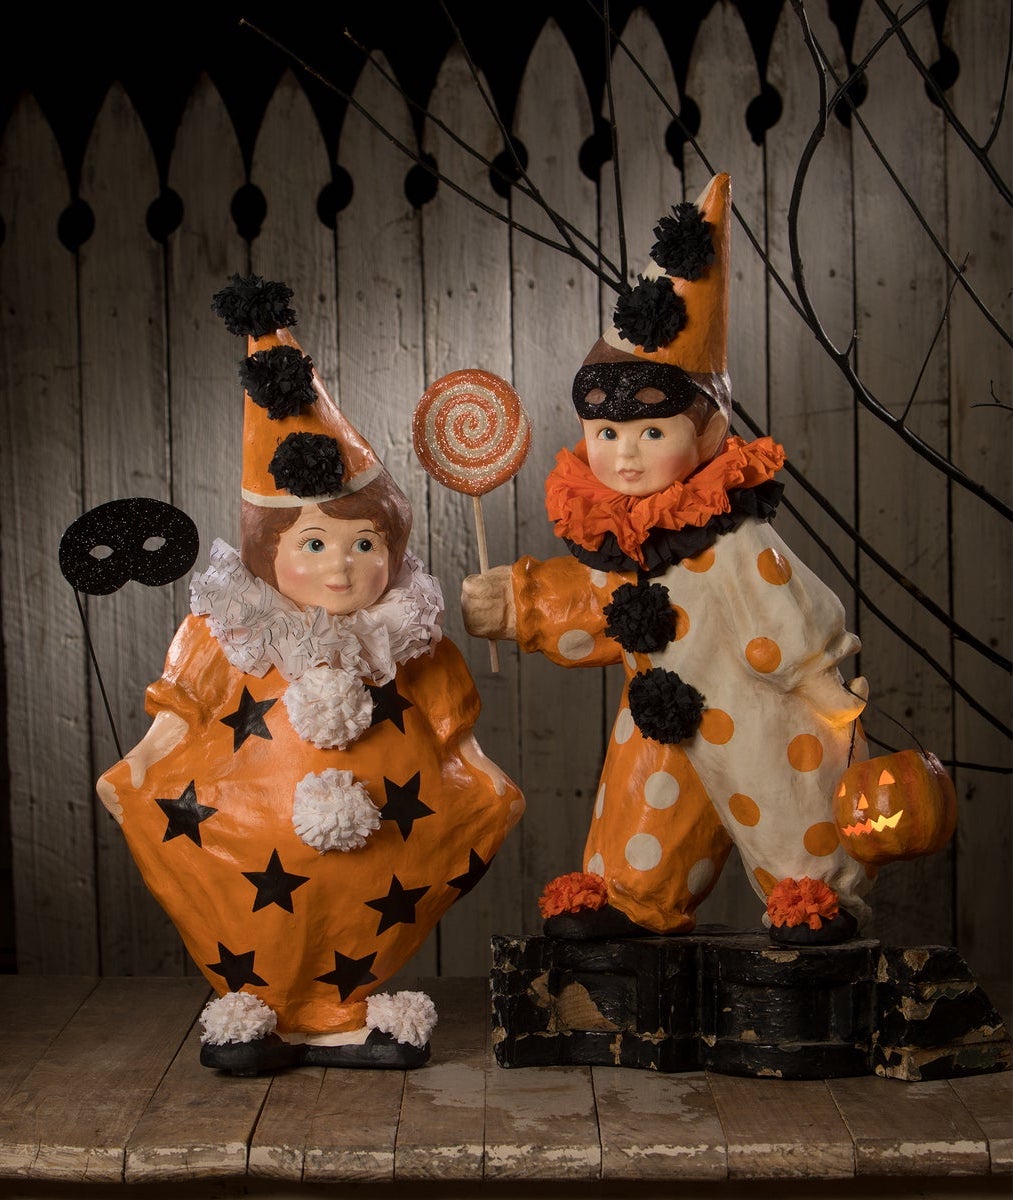 Vintage Halloween Clown Figurines made from Paper Mache